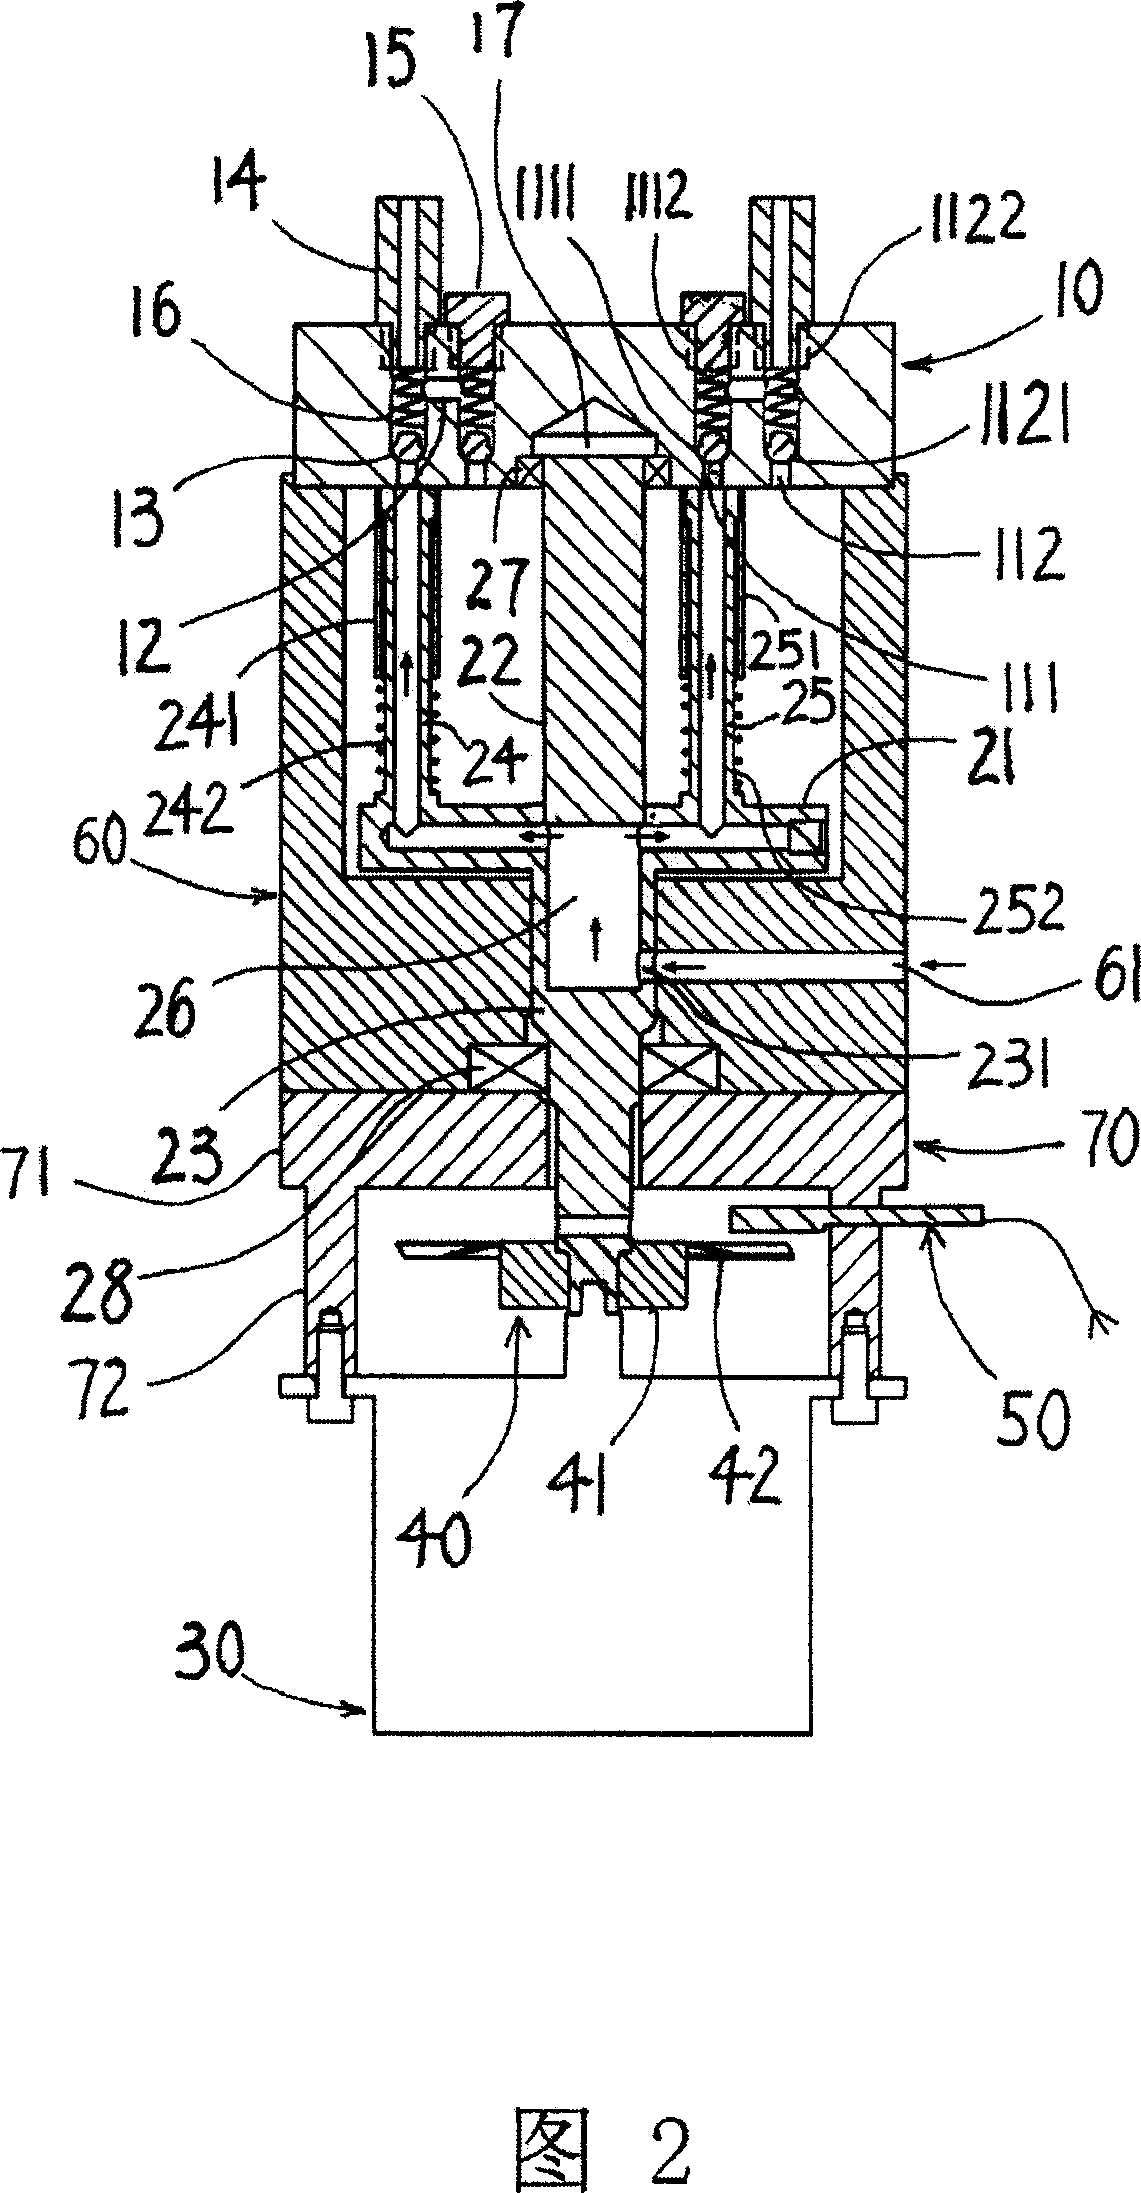 Multi-inlet and single outlet rotary fluid distributing apparatus